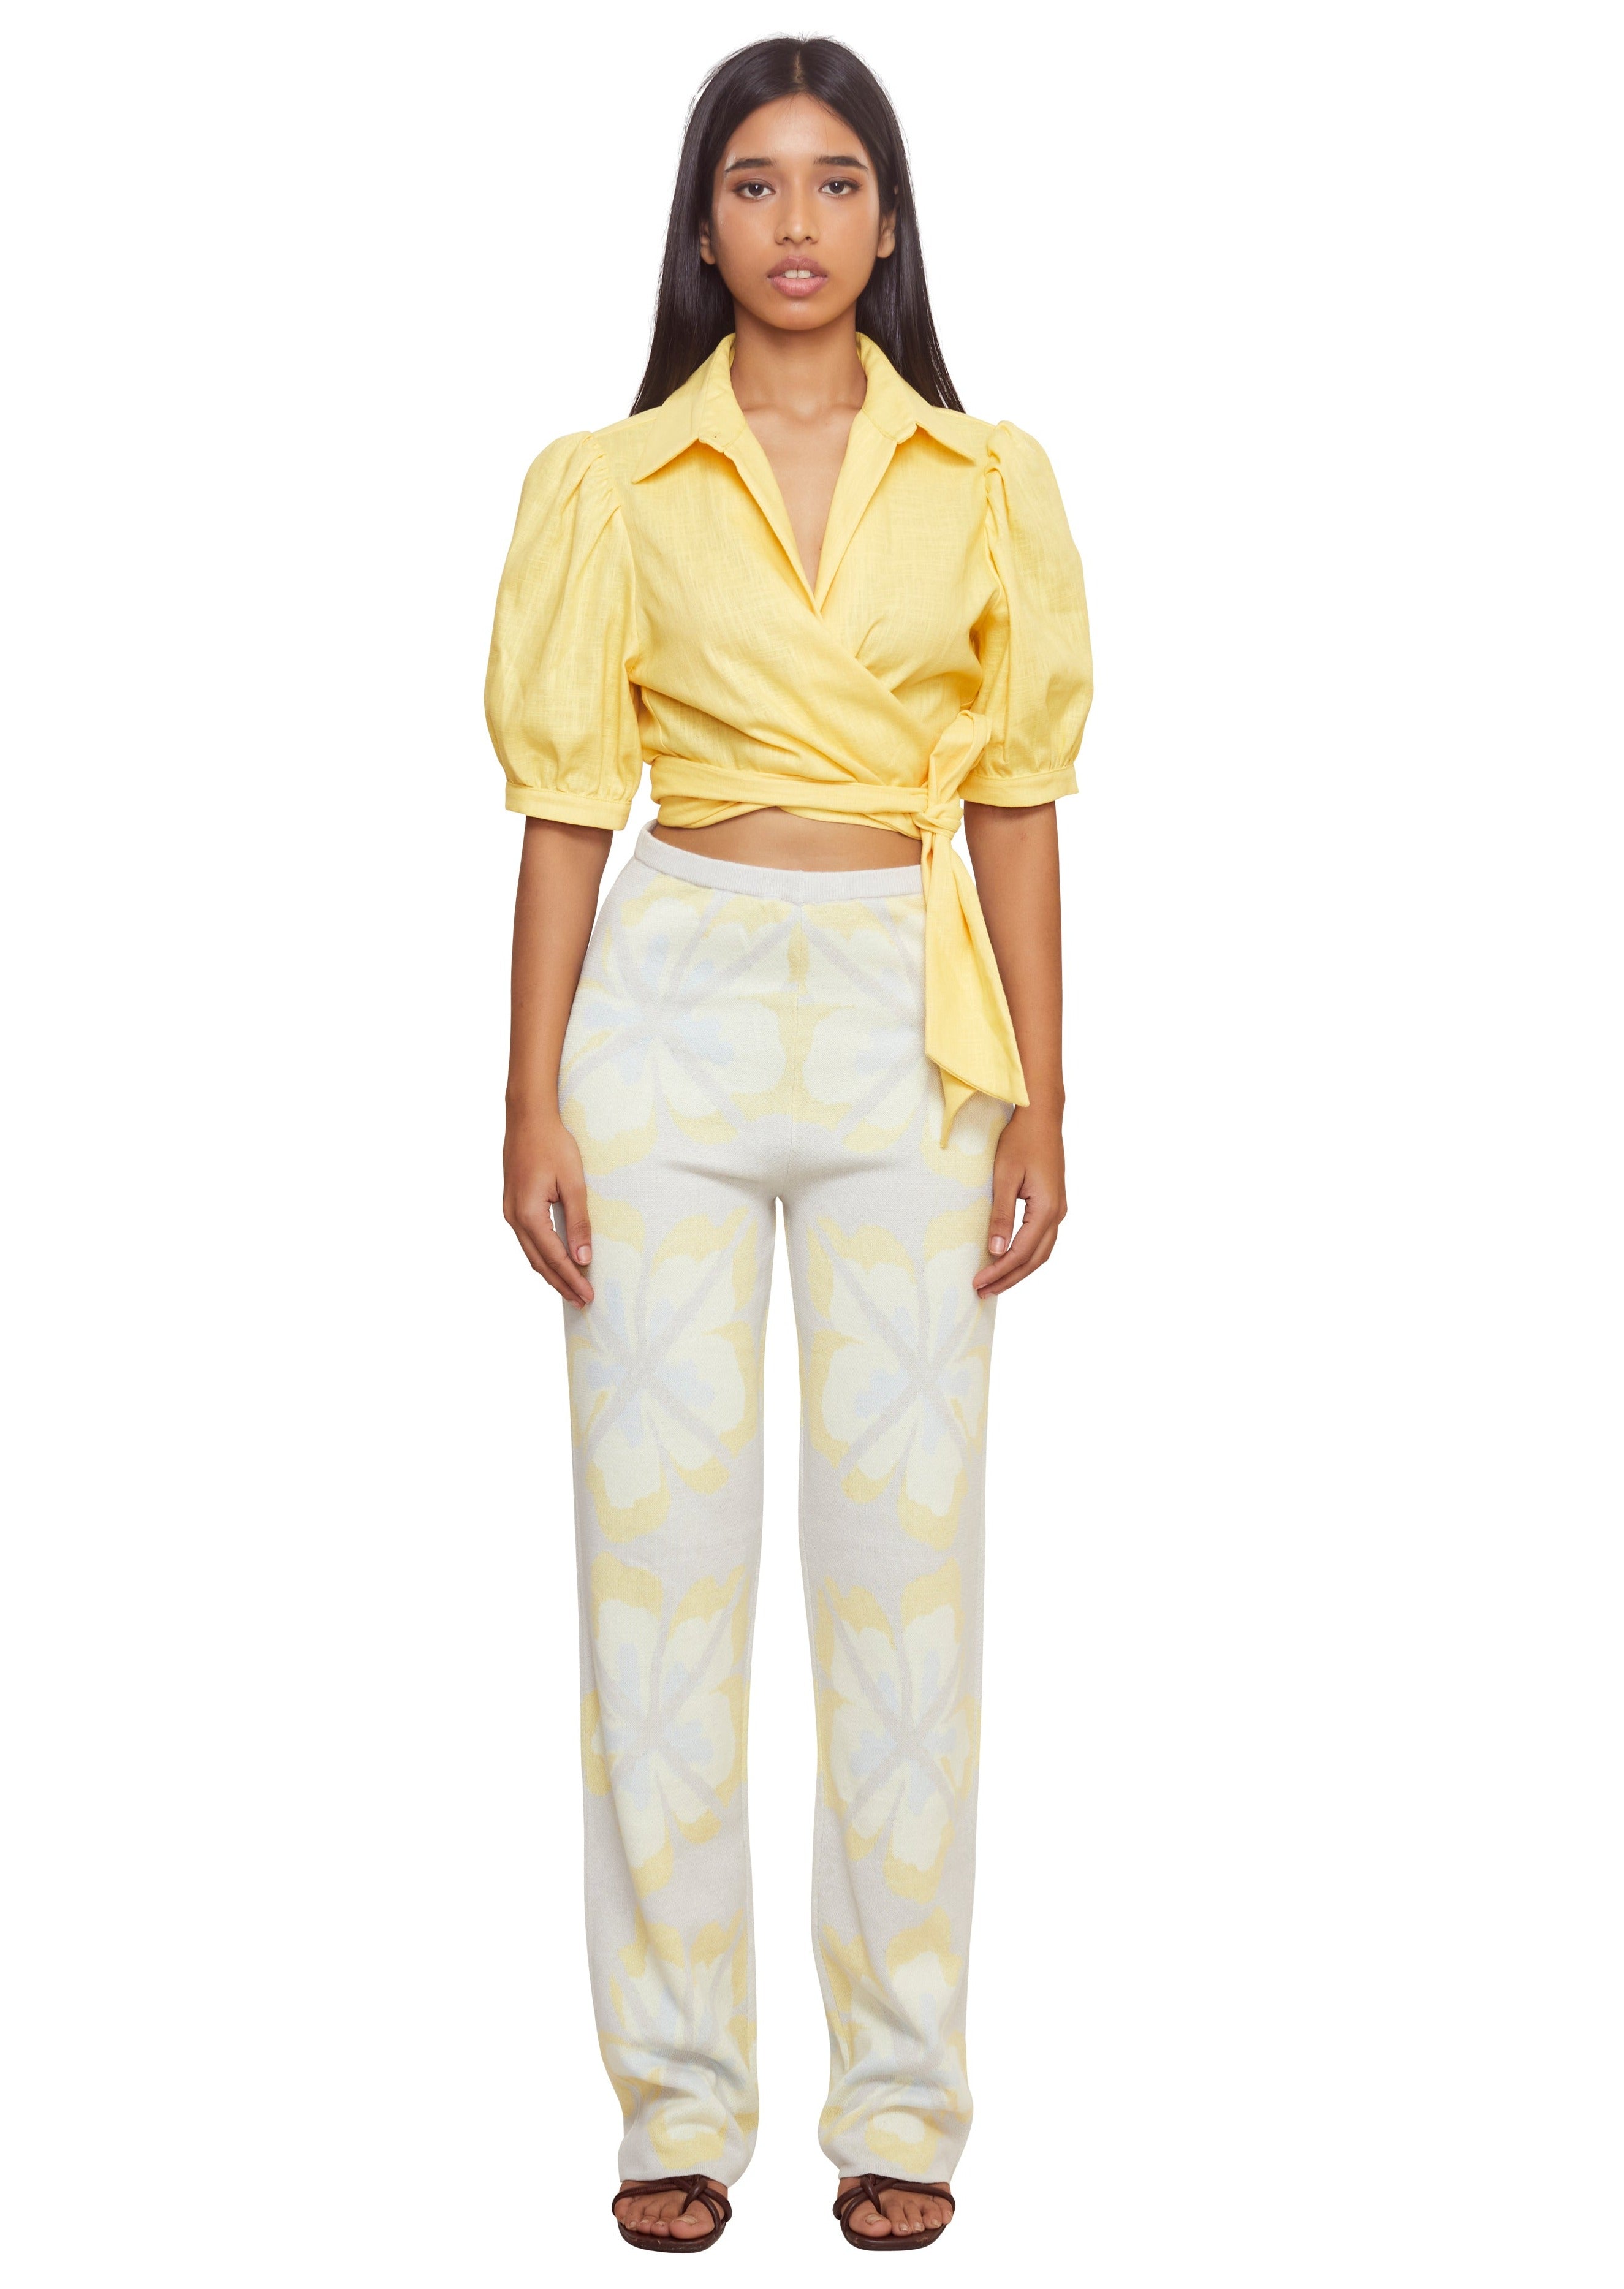 Mix up your classic shirt by making it yellow, linen and tied at the waist with low shoulders and mid-length puffy sleeves from the brand Musier